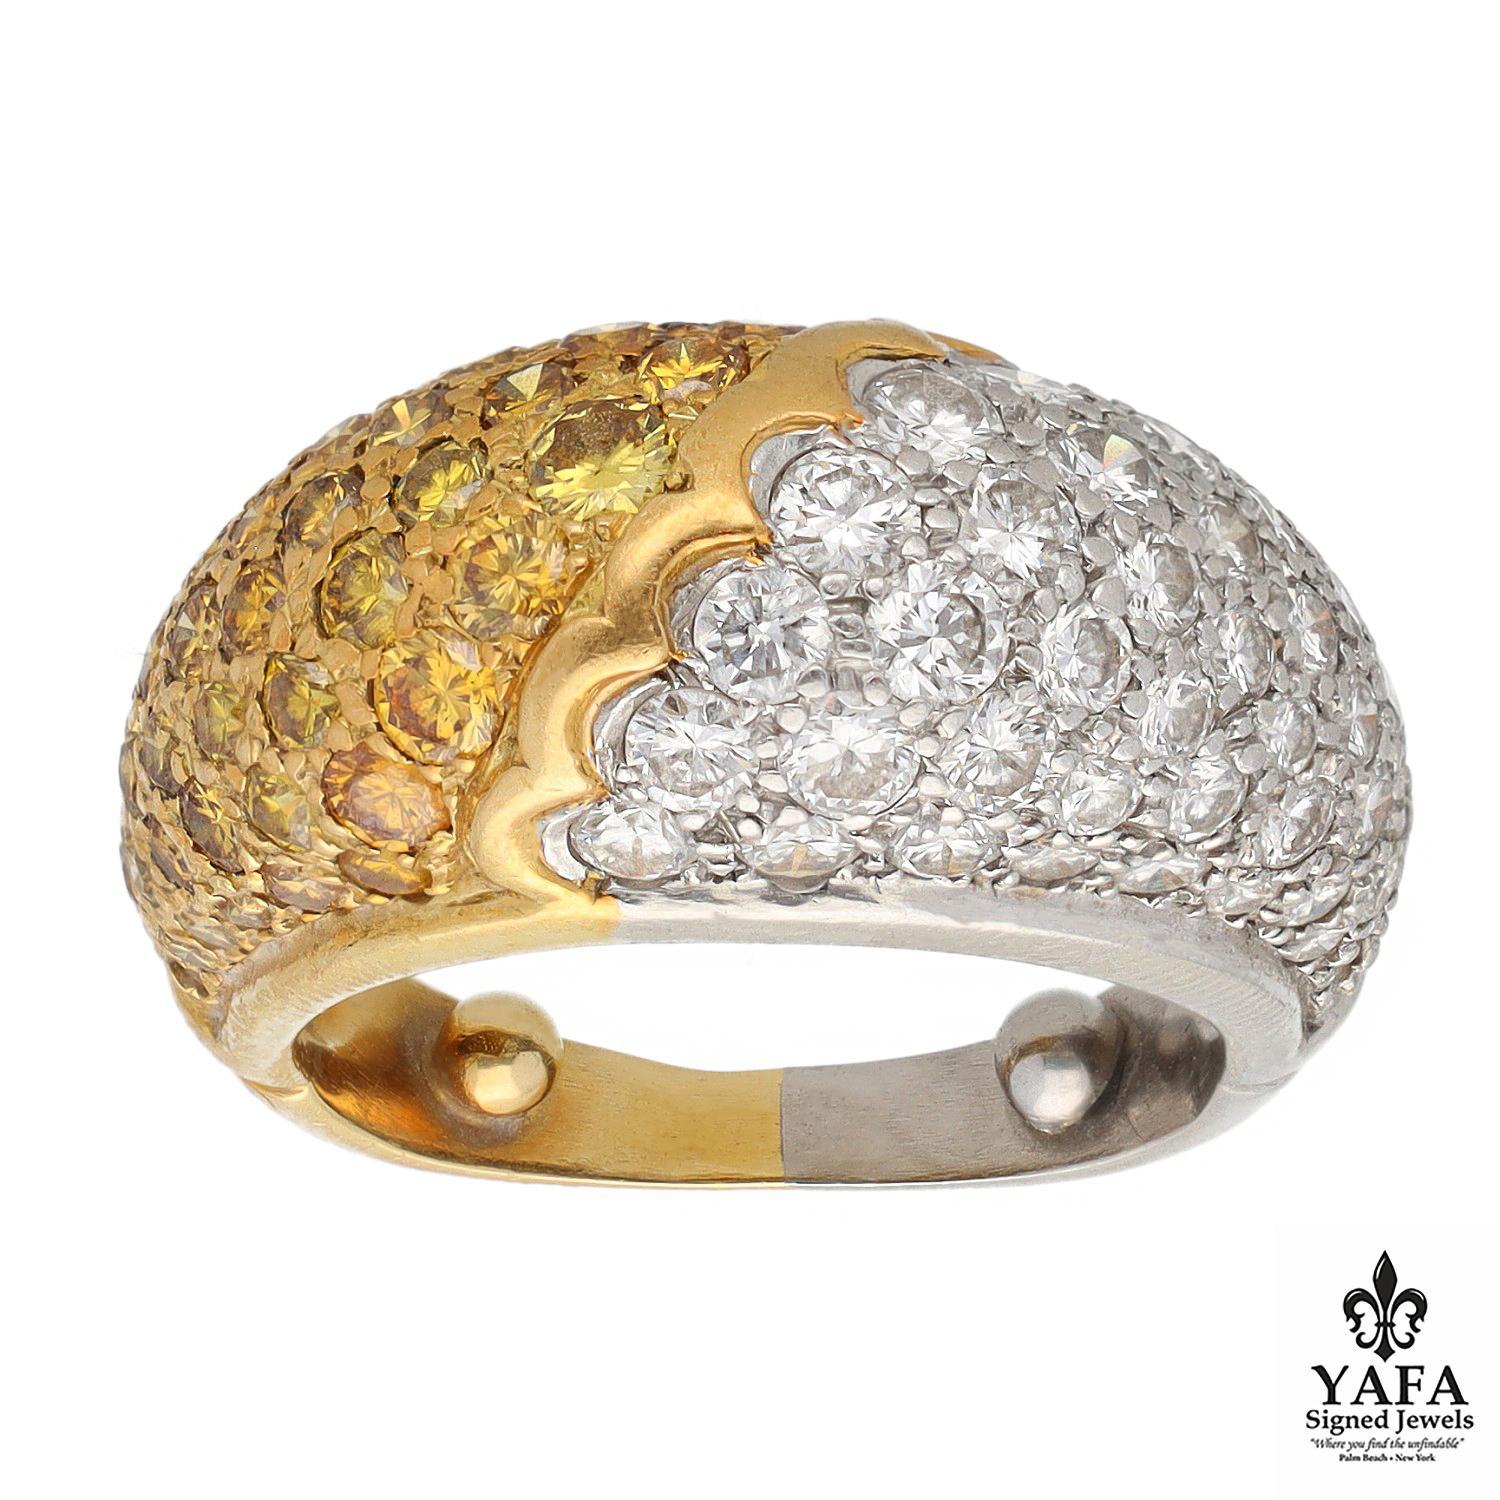 Van Cleef & Arpels Fancy Yellow and White Pave Diamond Bombe Ring In Excellent Condition For Sale In New York, NY